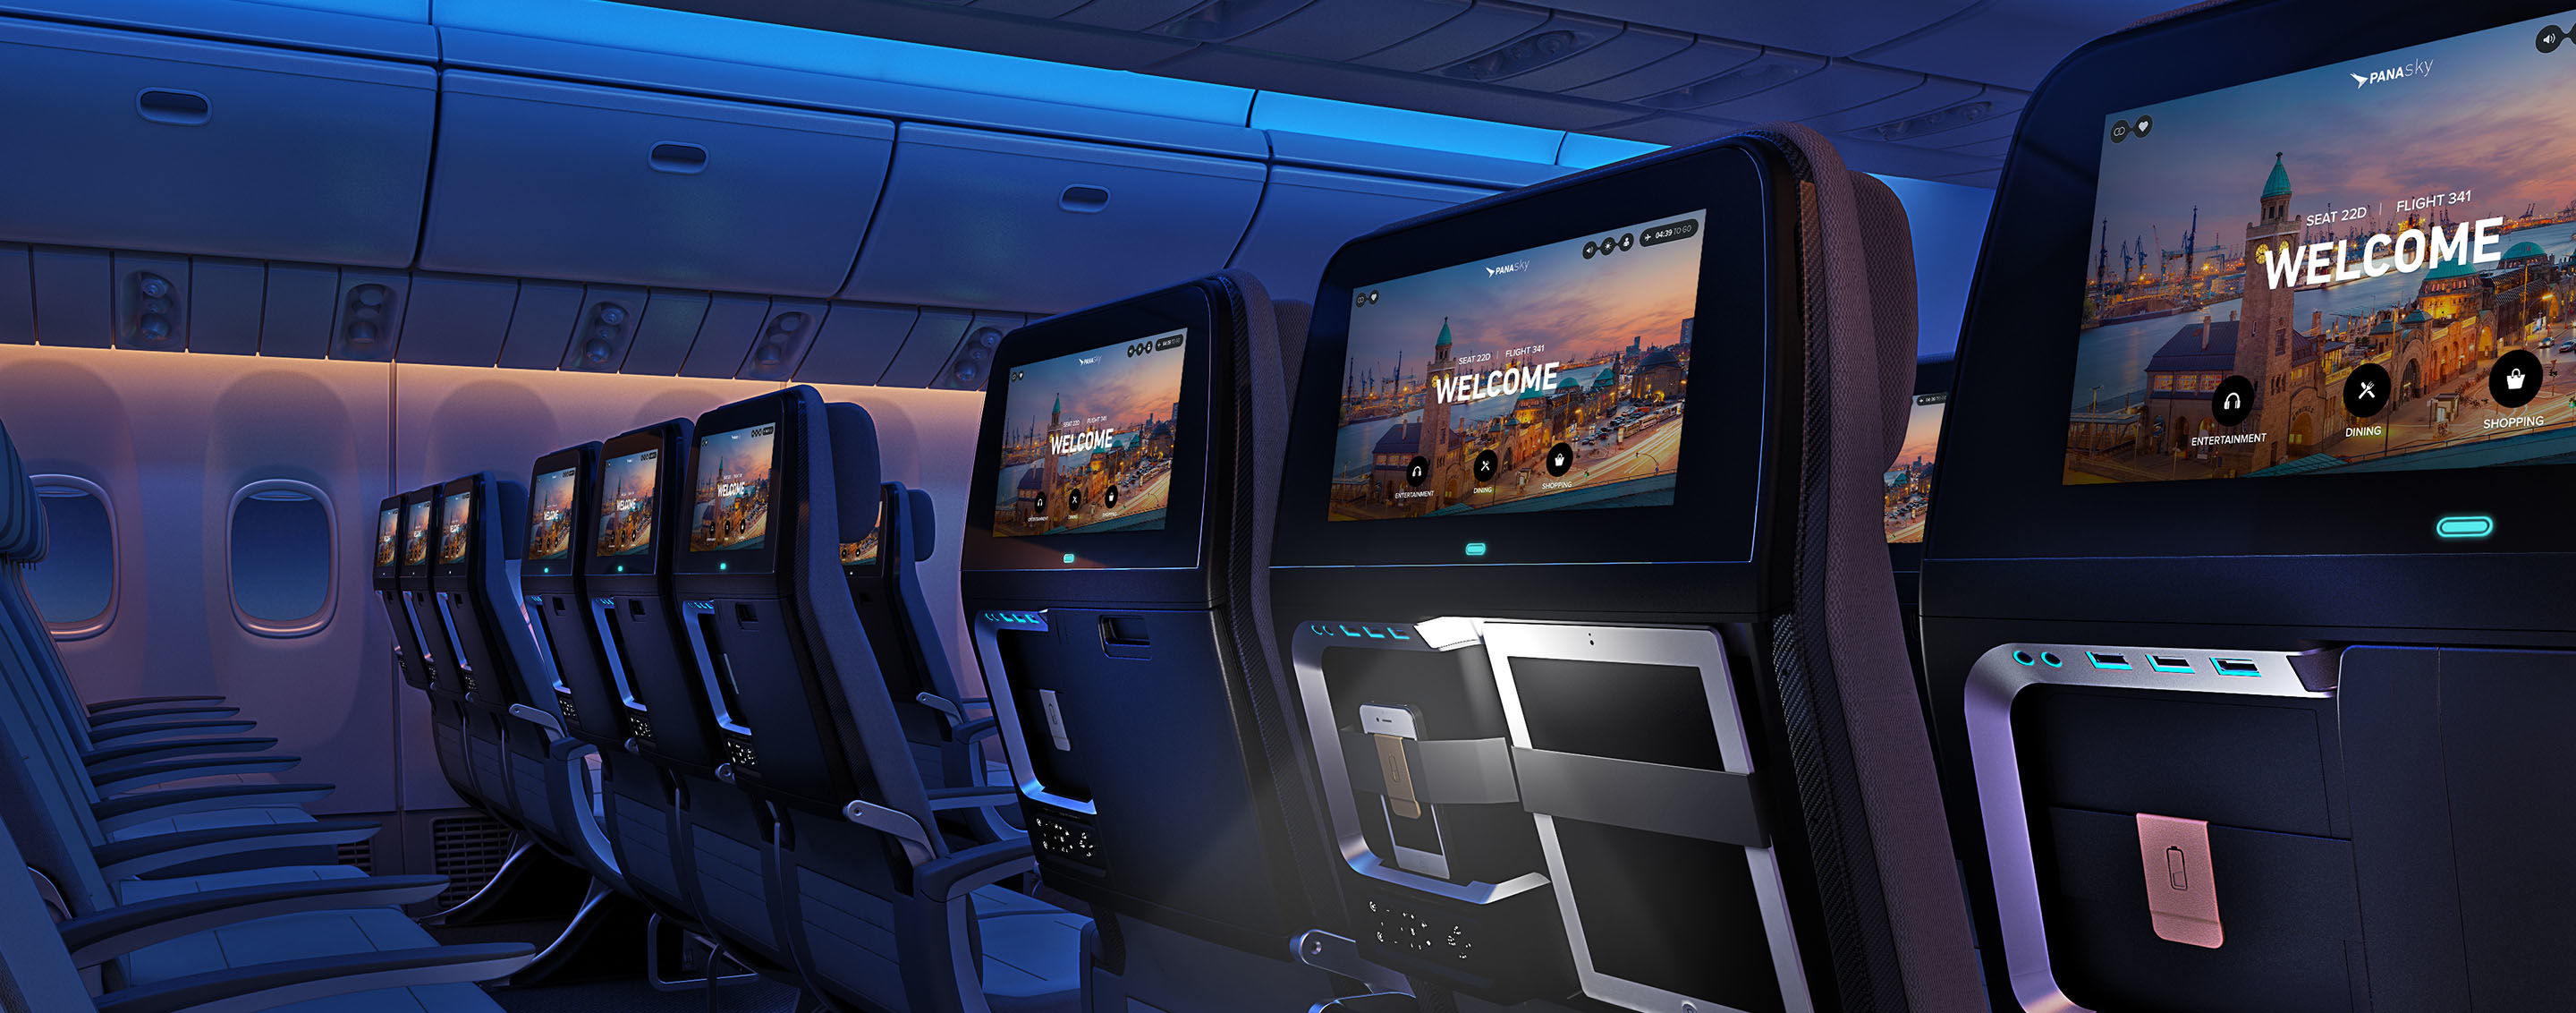 In-flight Entertainment Systems Market'